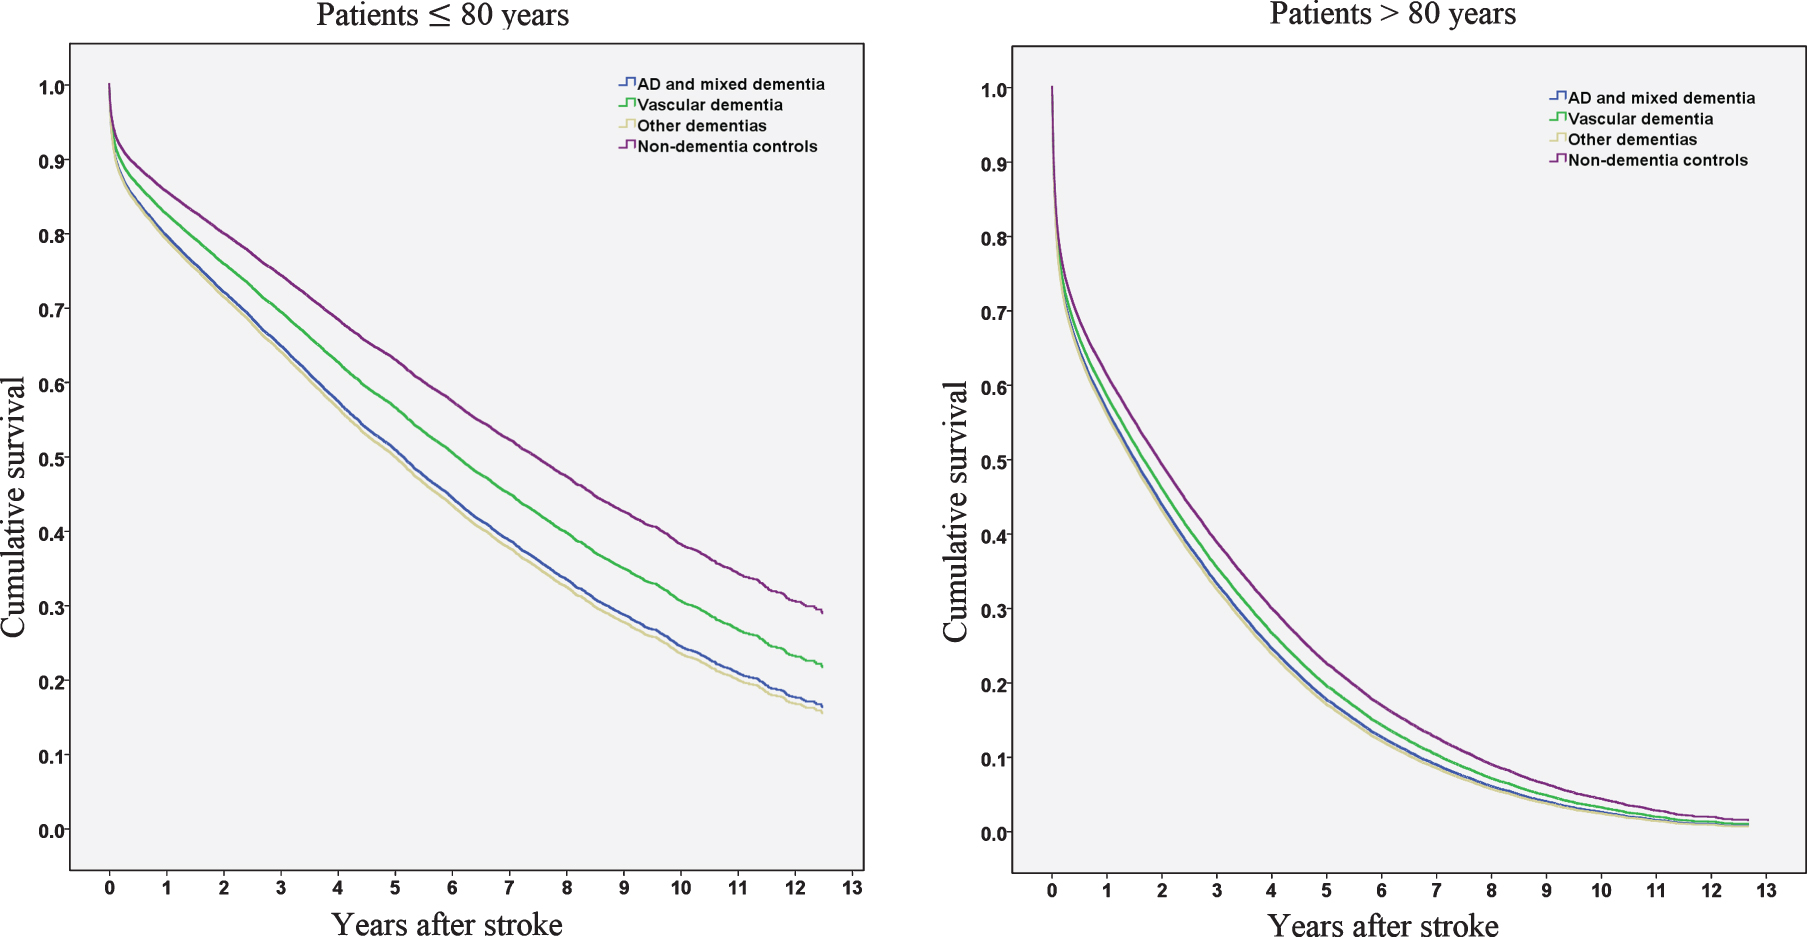 Cumulative survival in years after stroke in patients≤80 years and > 80 years.